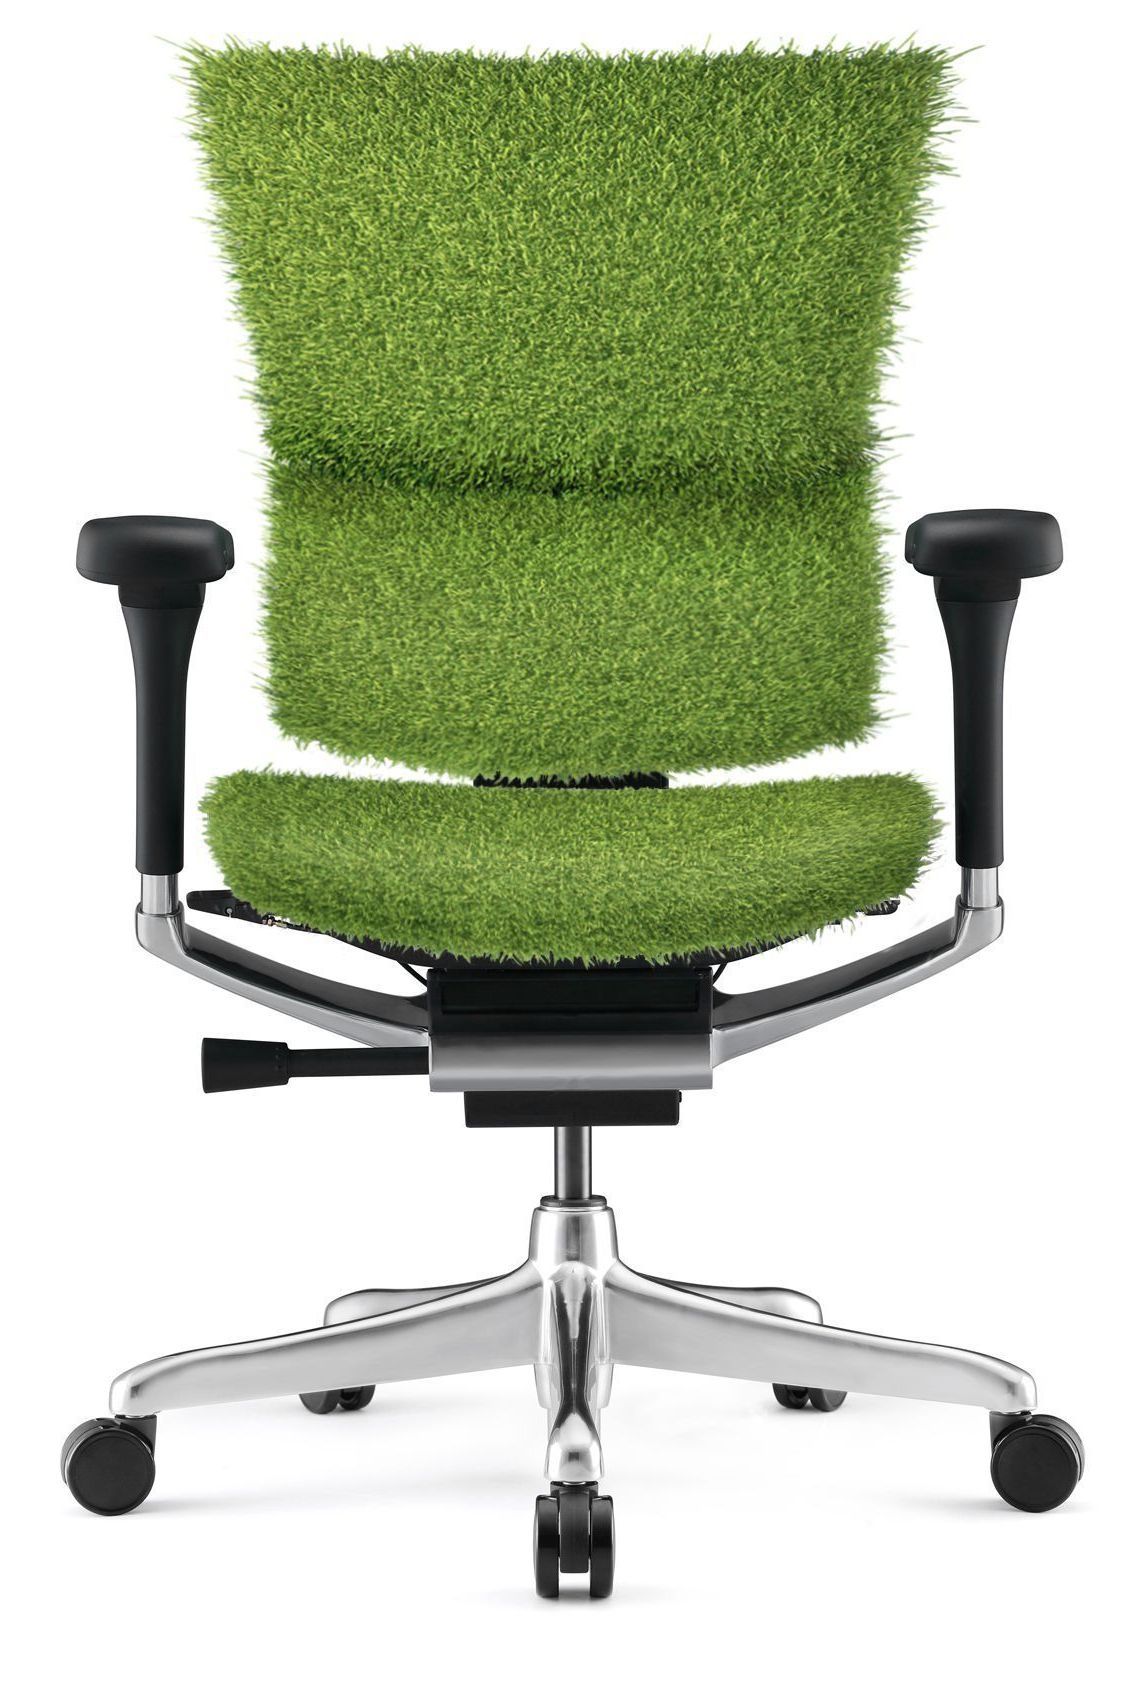 Comfort Mirus Elite G2 chair covered in grass